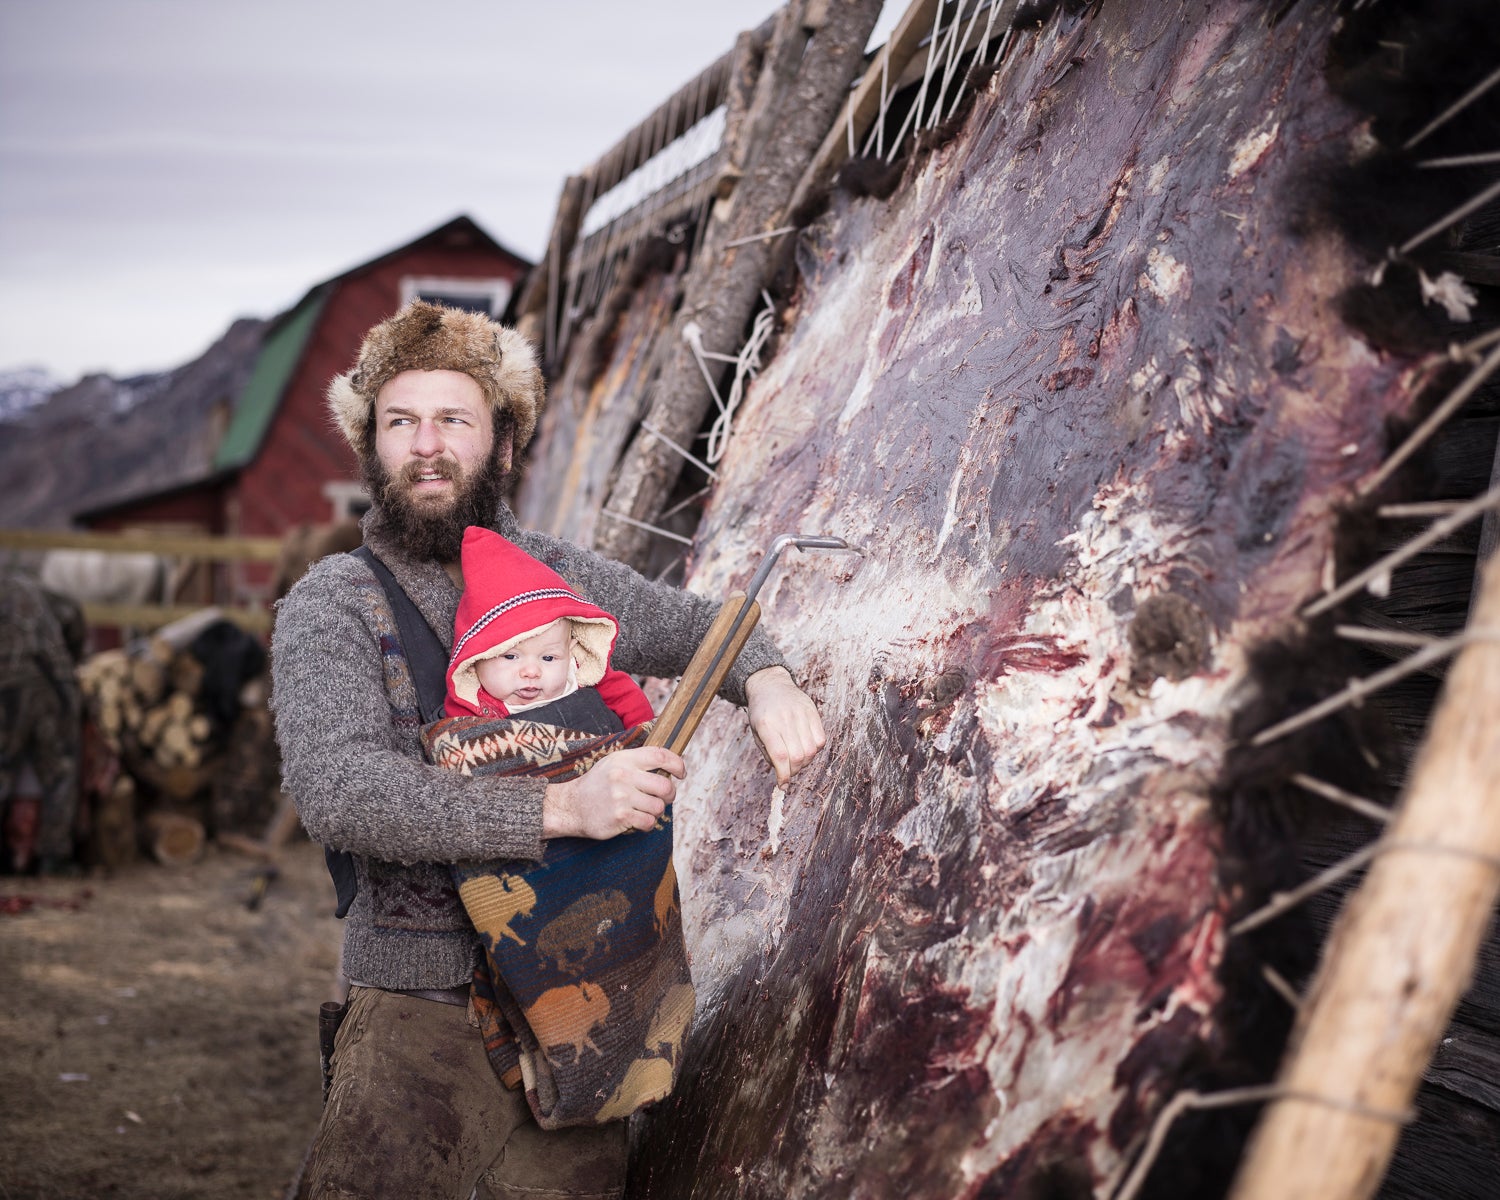 Alex carries his son as he works at fleshing a hide for tanning